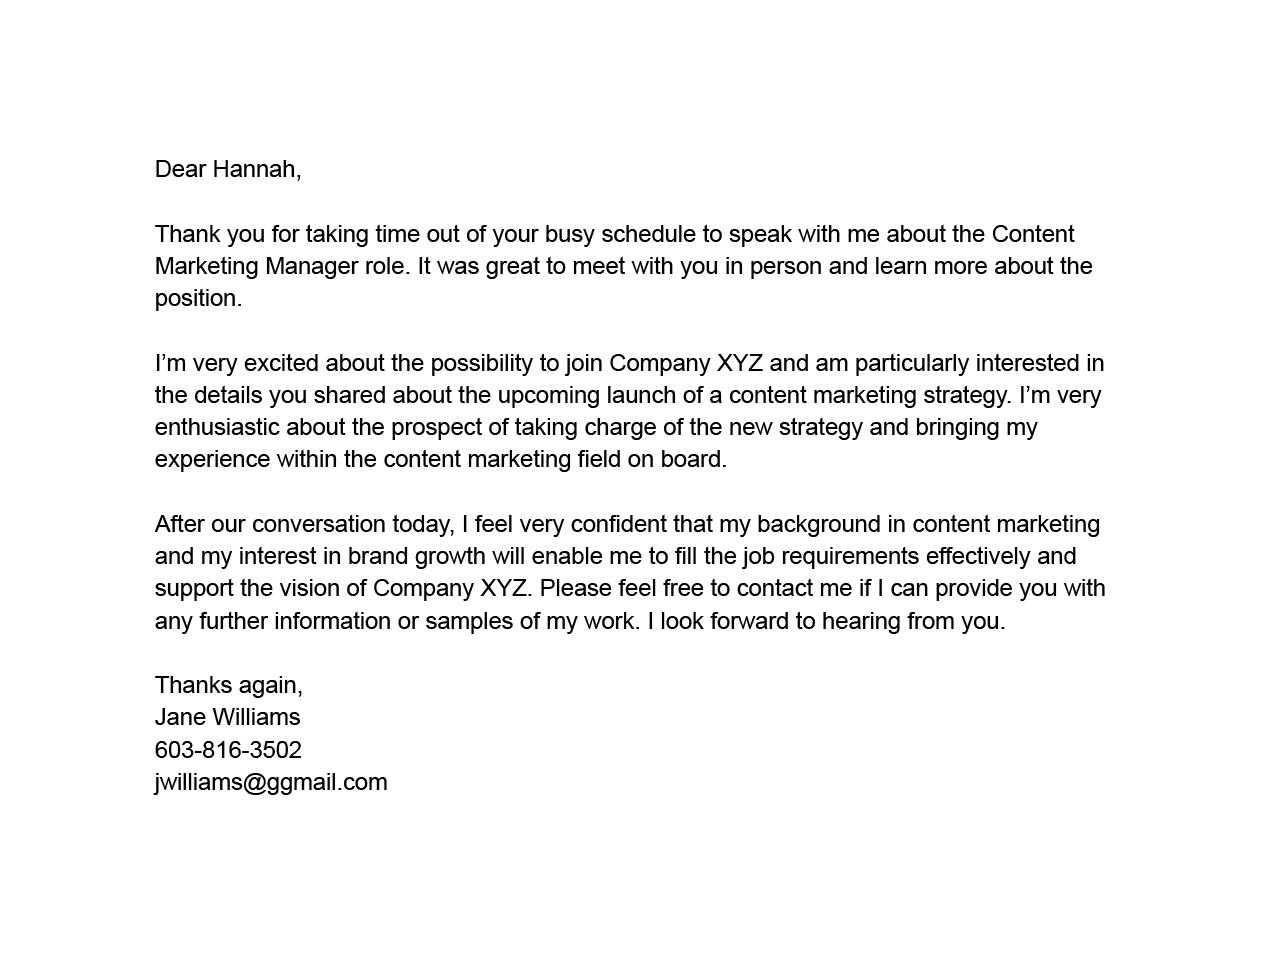 polite and informative job interview follow up email example for a content marketing manager position